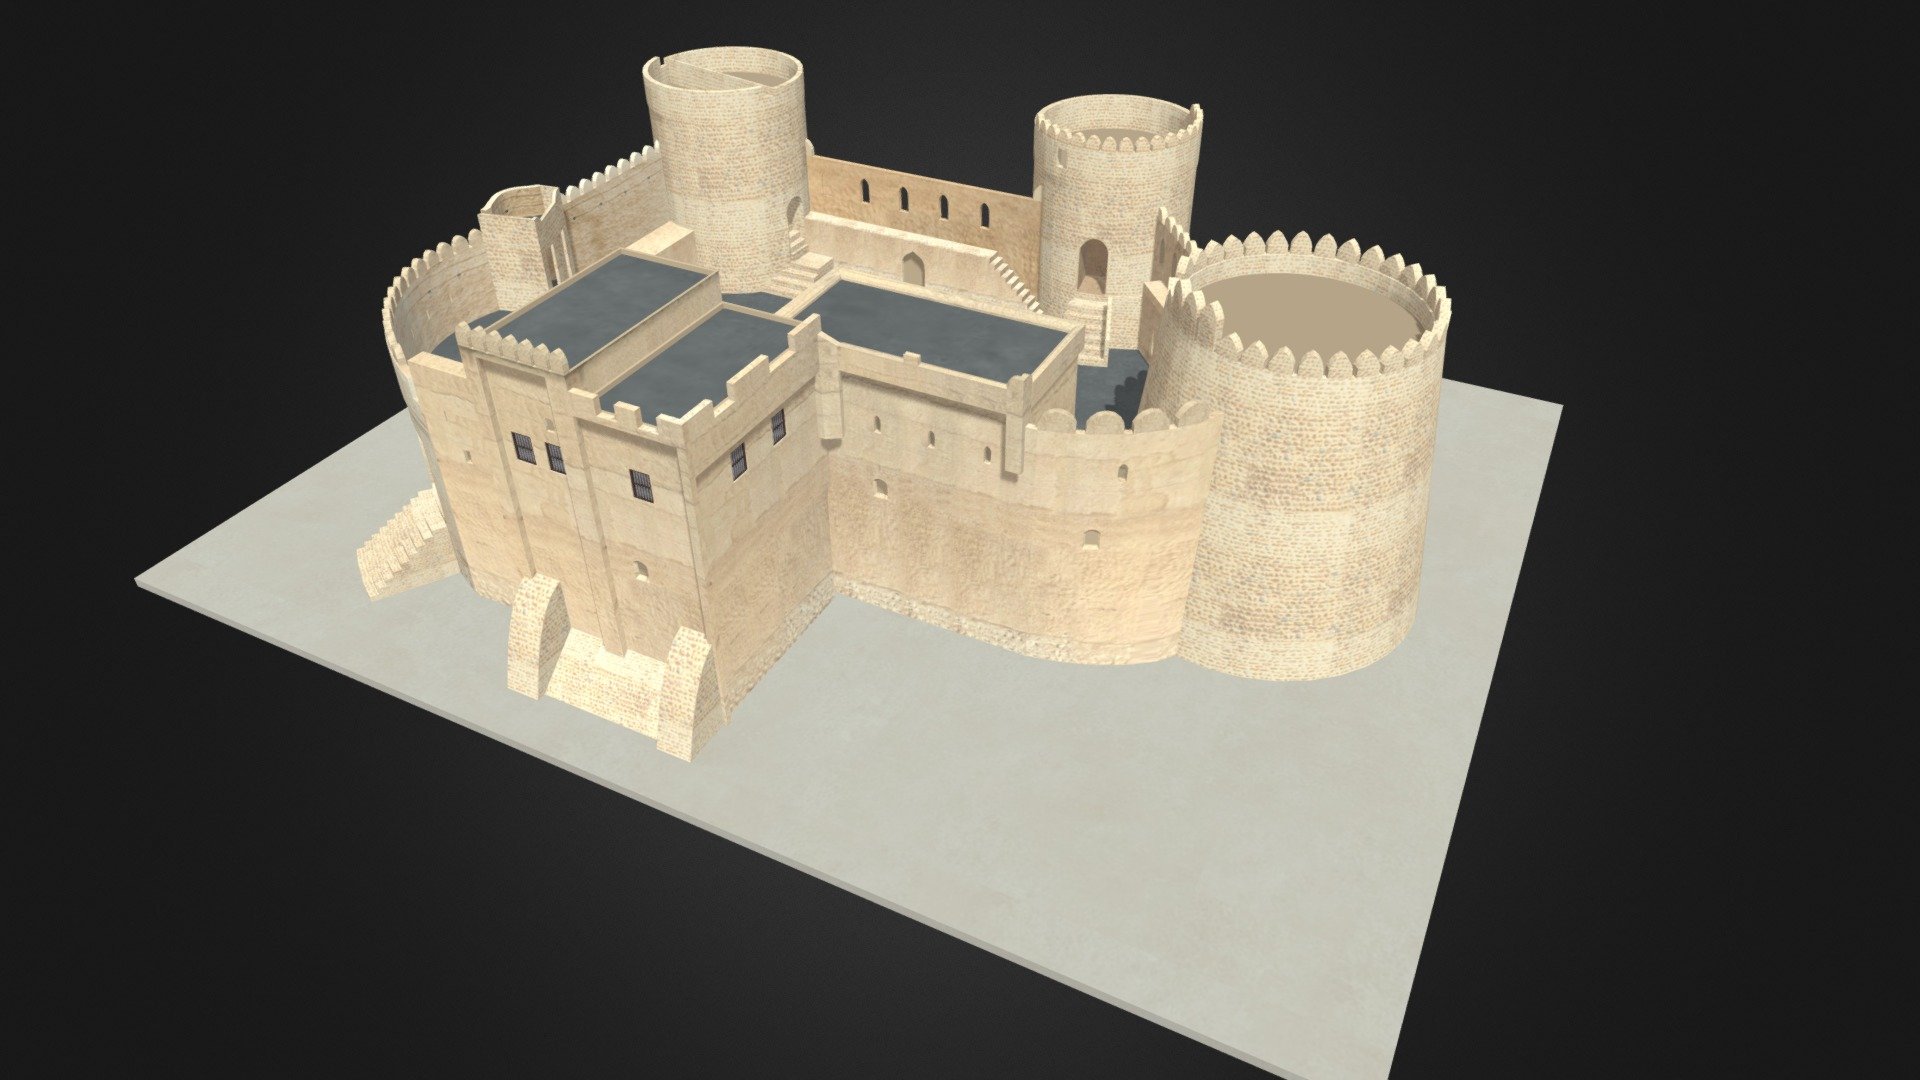 Fujairah Fort UAE 
Originally created with 3ds Max 2015 and rendered in V-Ray 3.0

Total Poly Counts:
Poly Count = 10205
Vertex Count = 11583 - Fujairah Fort UAE - 3D model by nuralam018 3d model